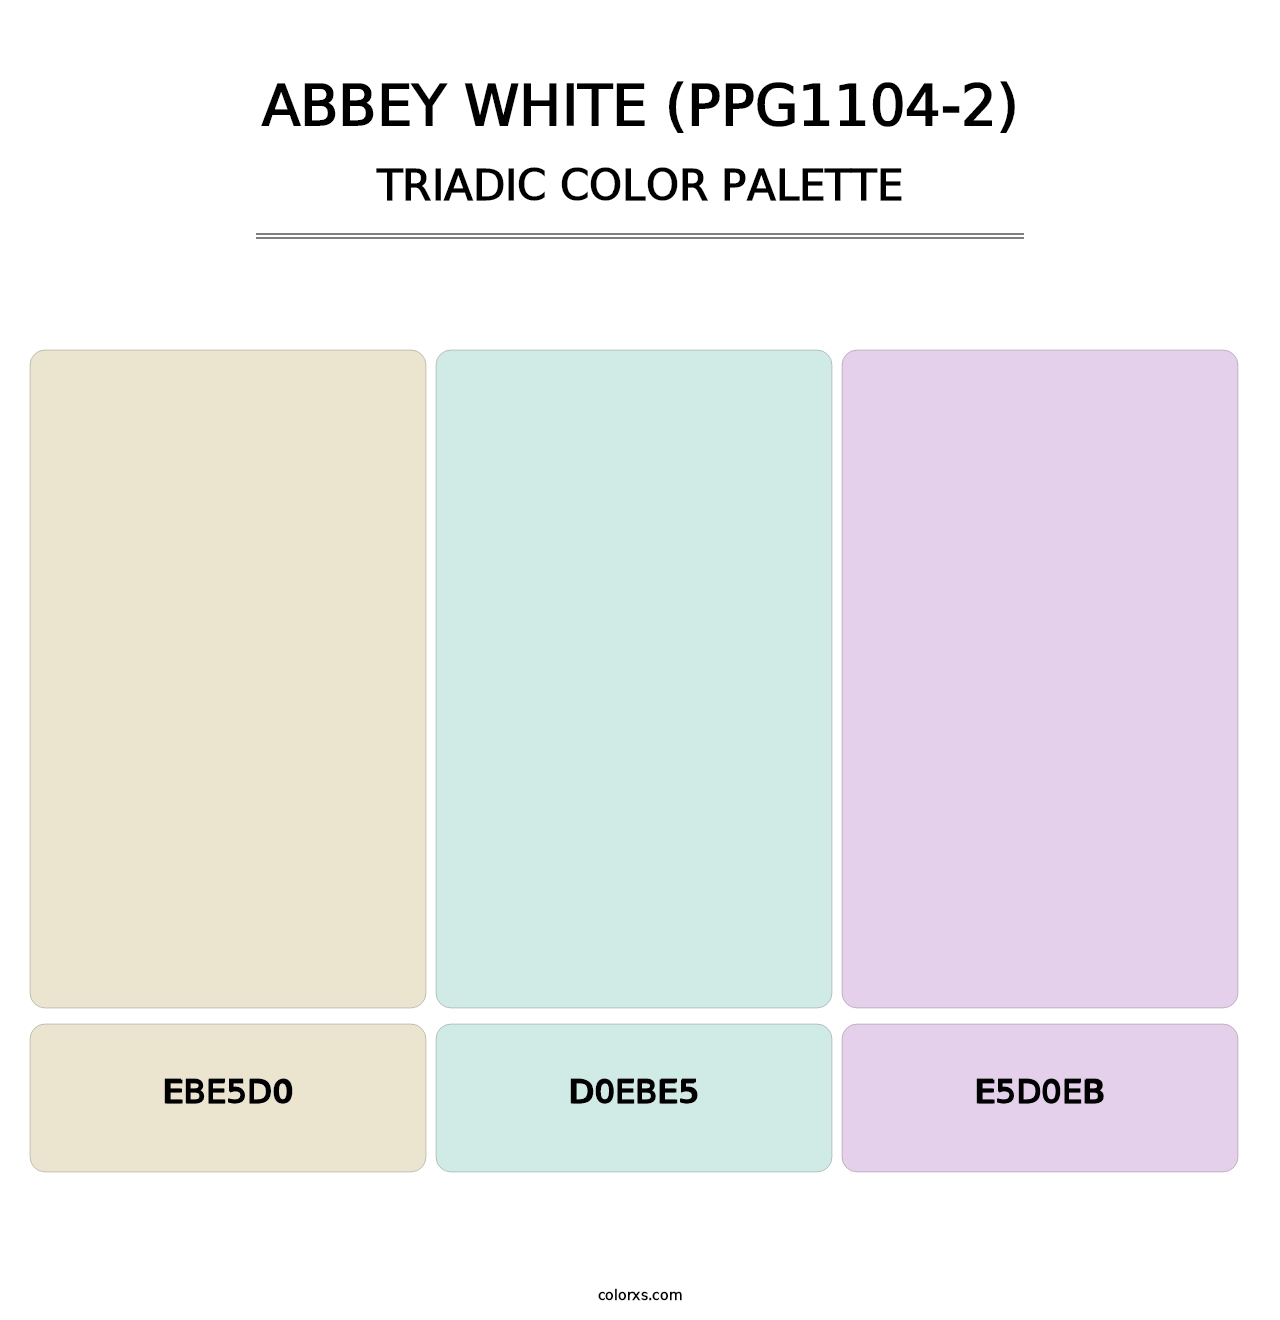 Abbey White (PPG1104-2) - Triadic Color Palette